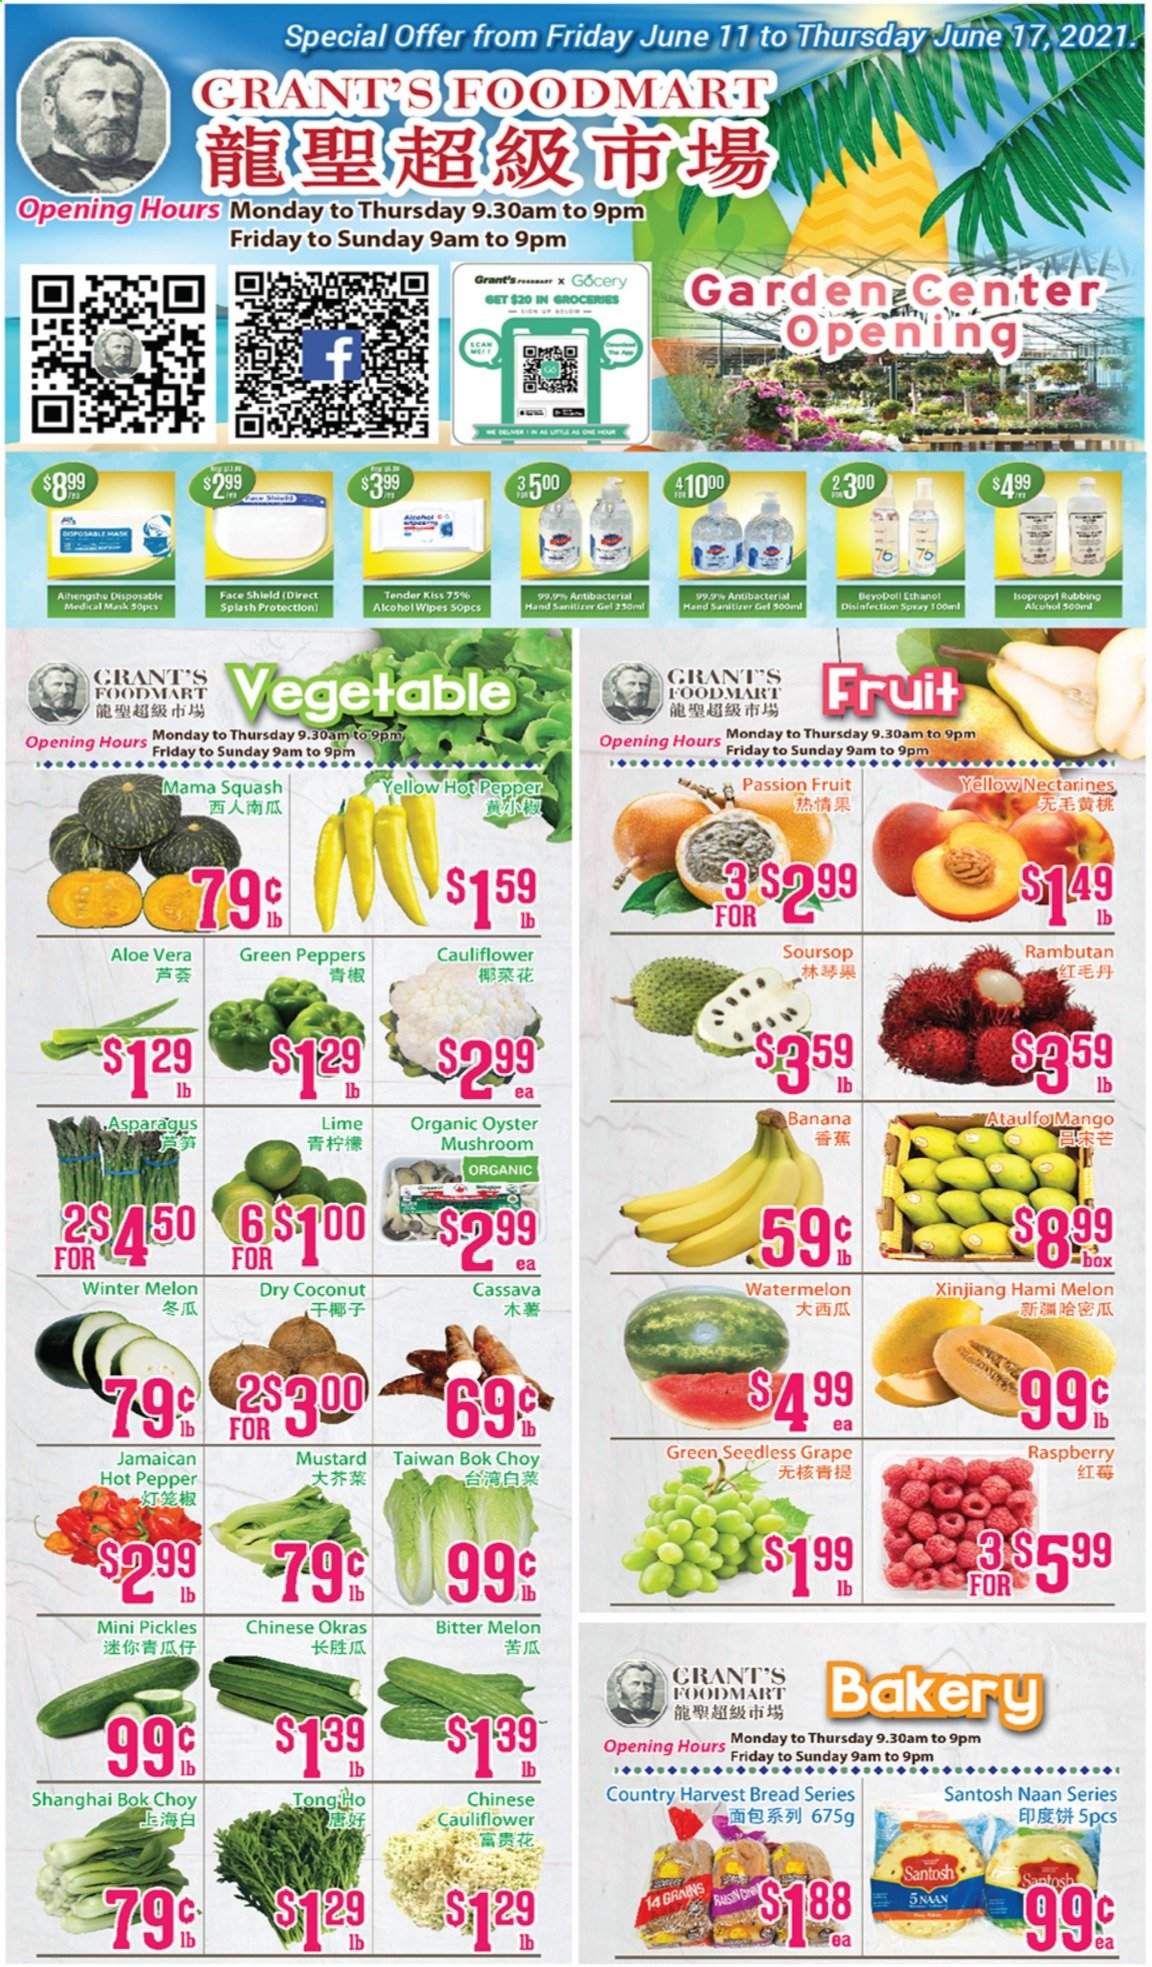 thumbnail - Grant's Foodmart Flyer - June 11, 2021 - June 17, 2021 - Sales products - oyster mushrooms, mushrooms, bread, asparagus, bok choy, cauliflower, peppers, cassava, nectarines, watermelon, coconut, melons, oysters, Country Harvest, pickles, pepper, mustard, Grant's, wipes. Page 1.